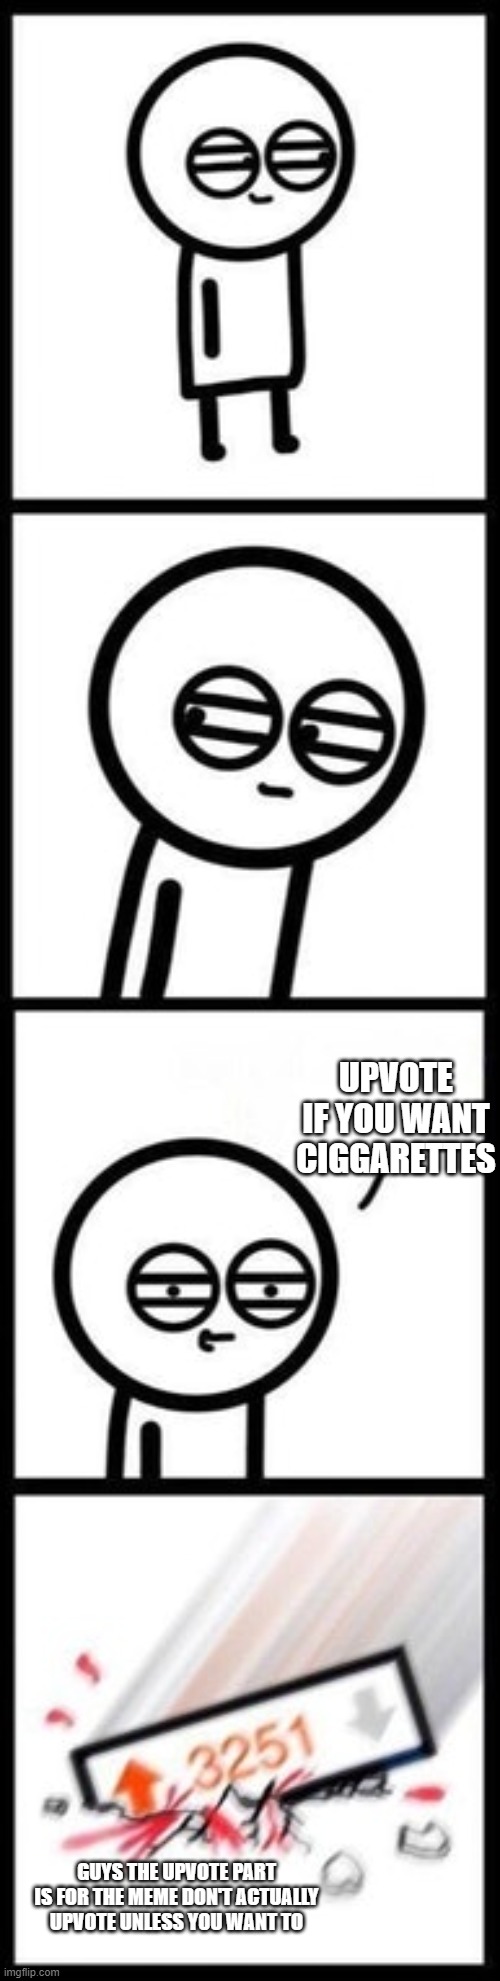 don't actually upvote | UPVOTE IF YOU WANT CIGGARETTES; GUYS THE UPVOTE PART IS FOR THE MEME DON'T ACTUALLY UPVOTE UNLESS YOU WANT TO | image tagged in 3251 upvotes | made w/ Imgflip meme maker